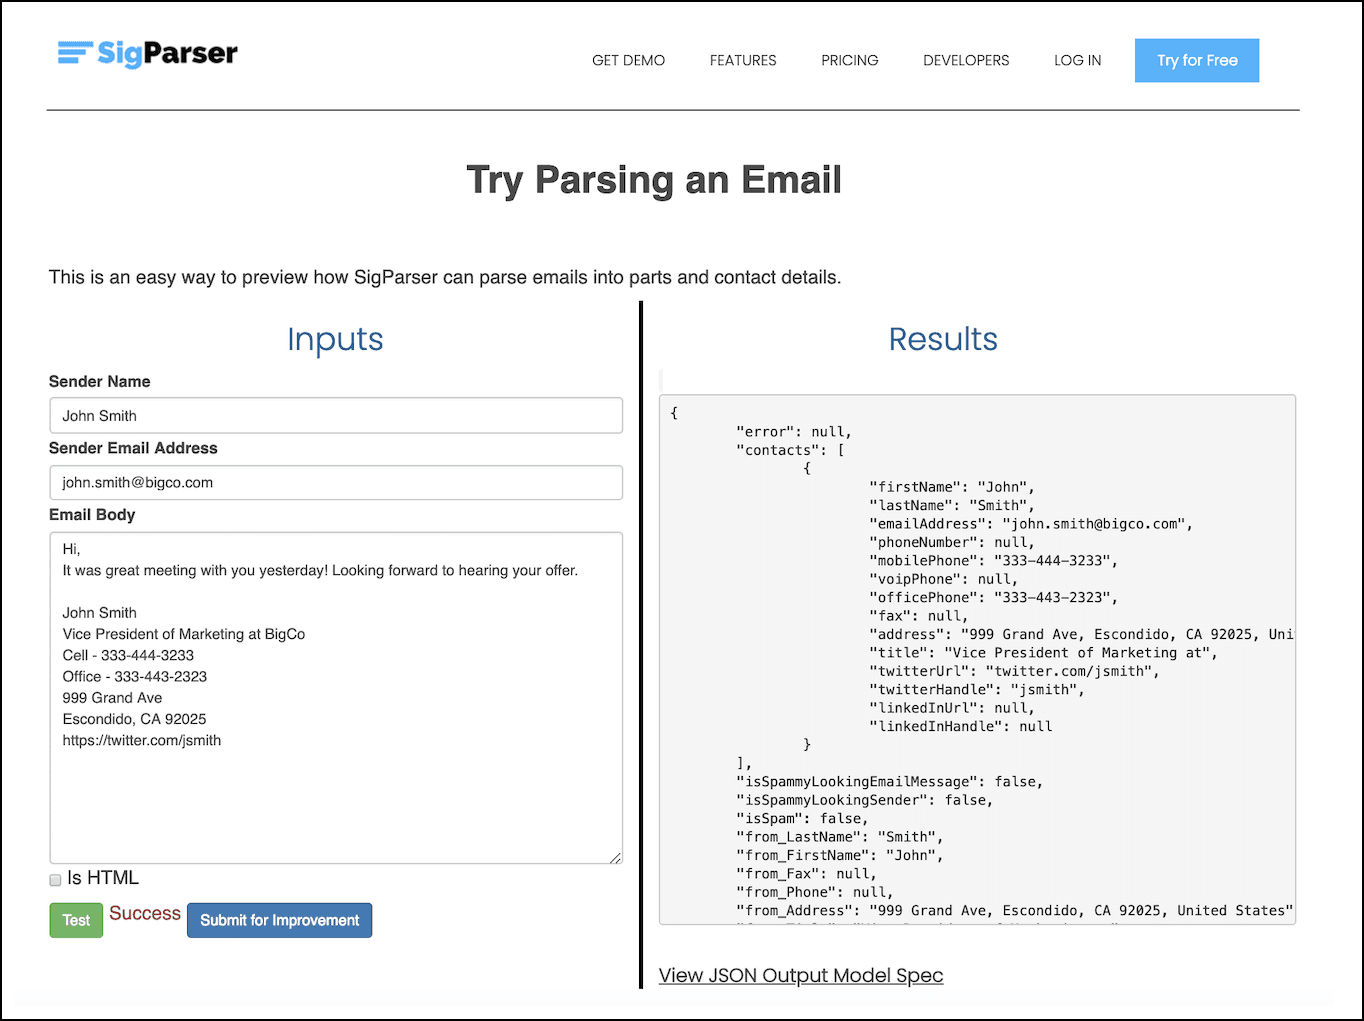 The SigParser application lets you provide a sample email and preview the metadata it is able to determine about the email.